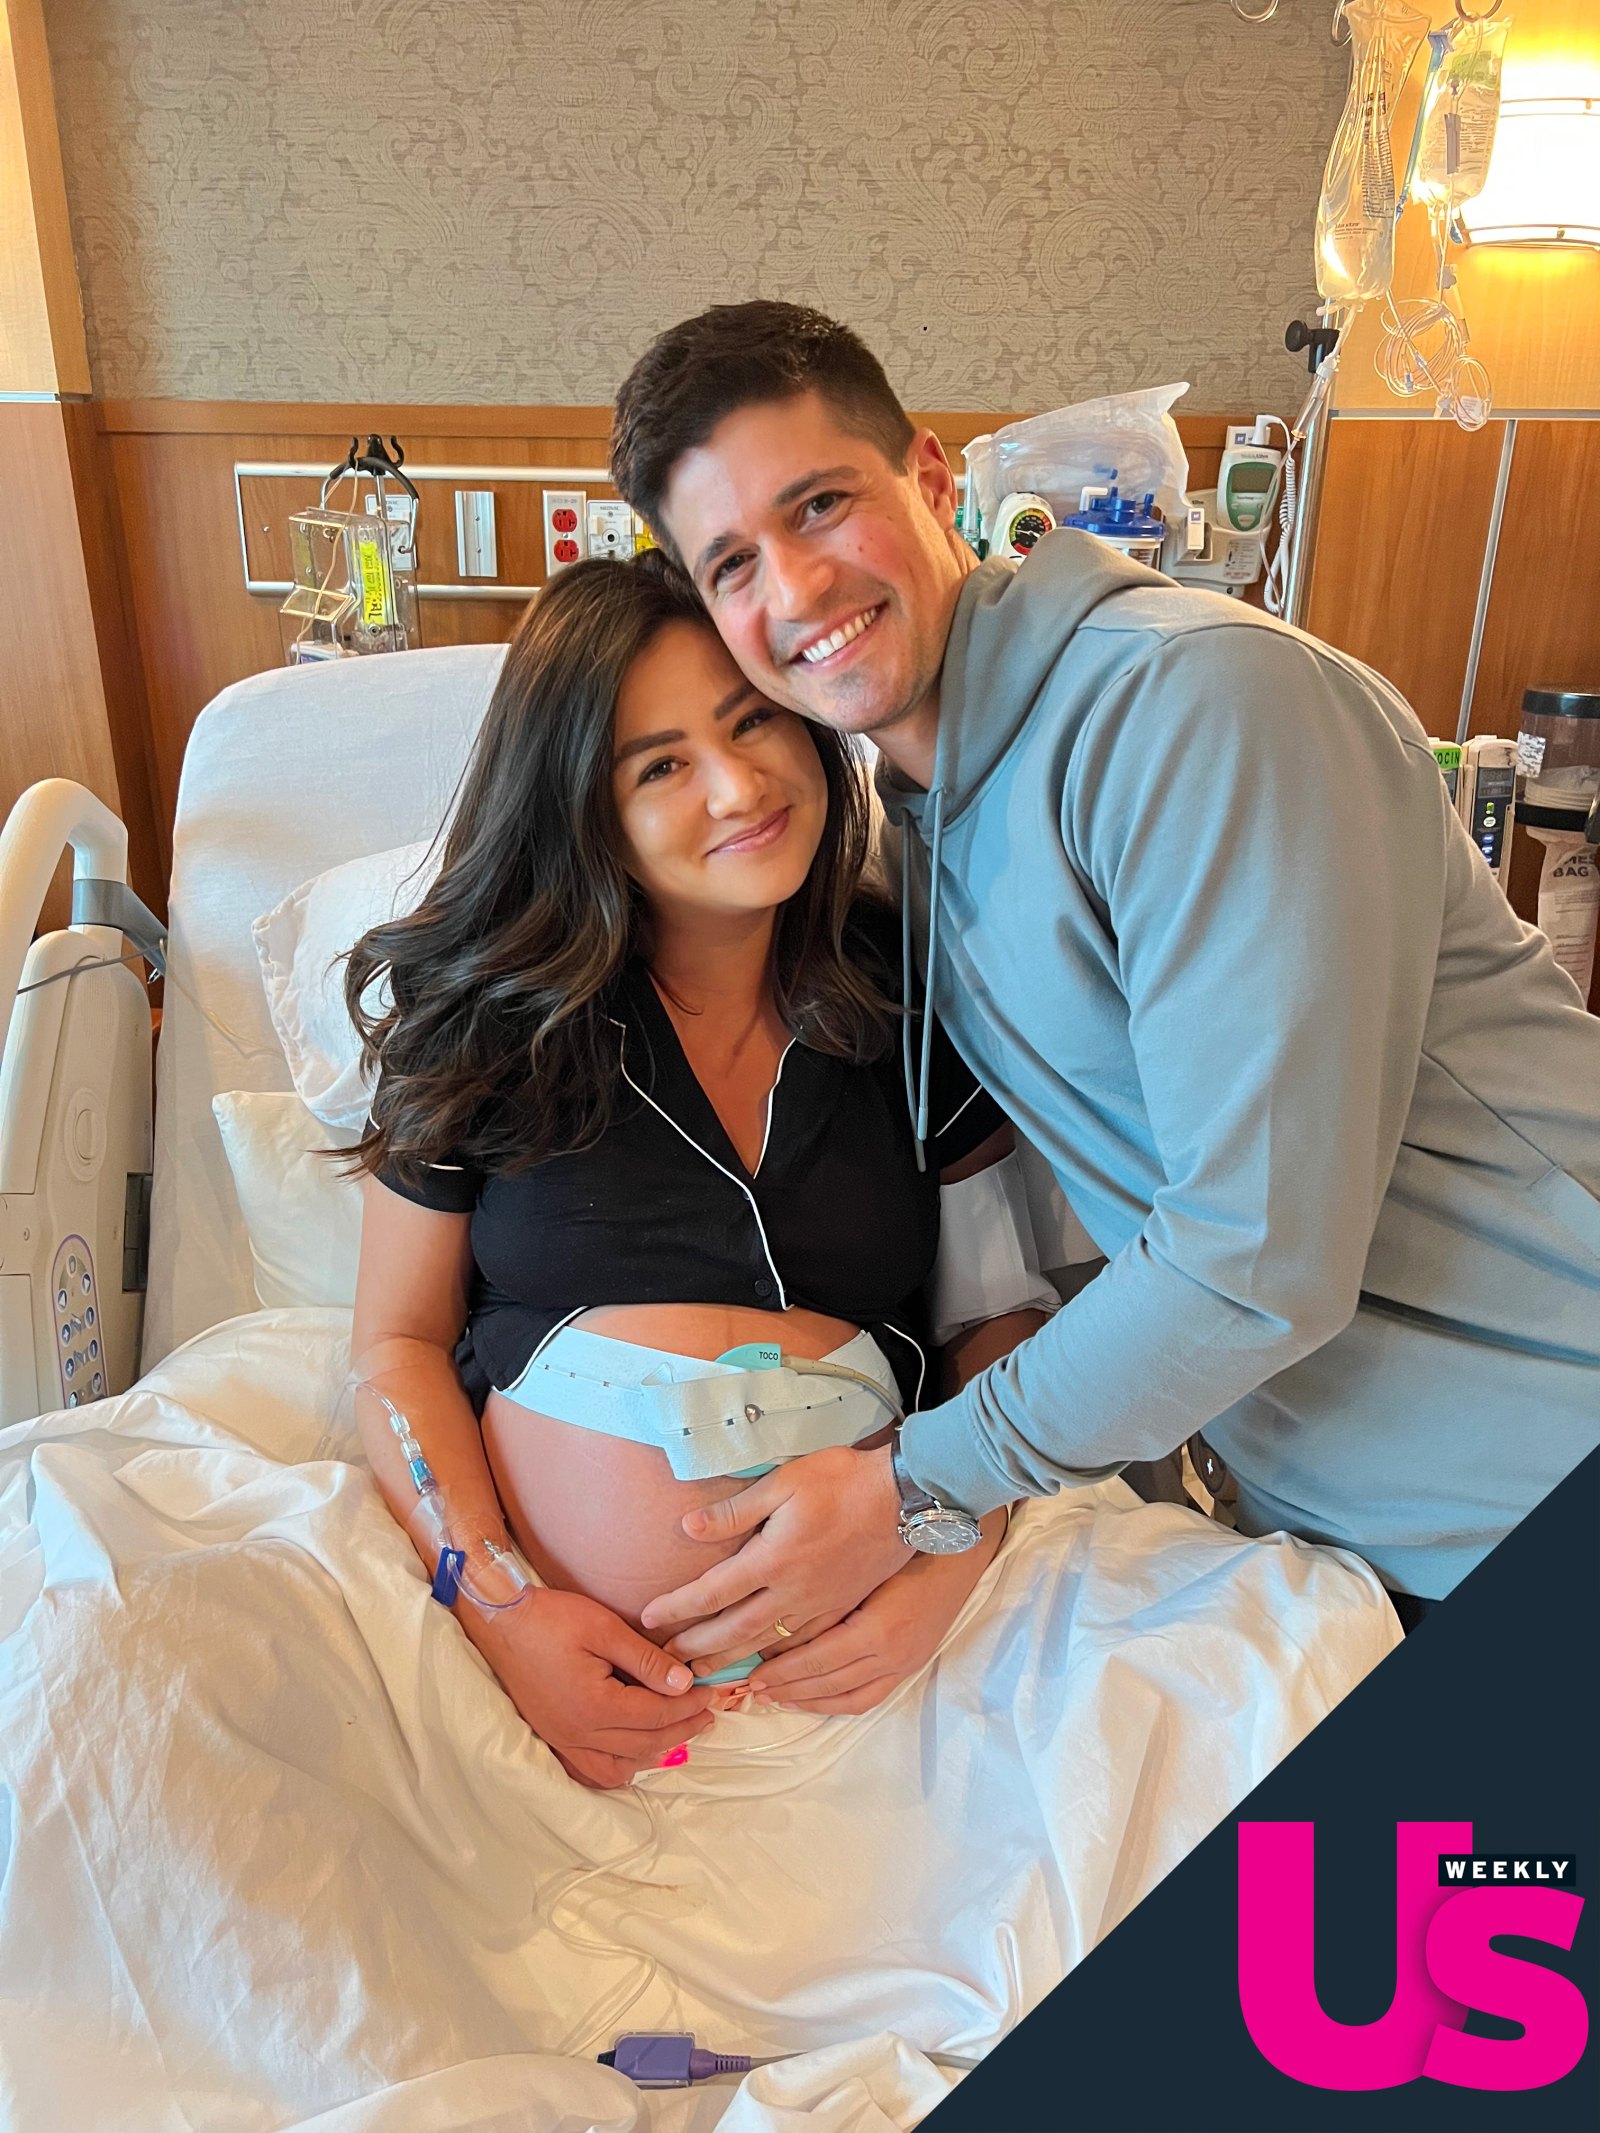 Bachelor’s Caila Quinn Gives Birth, Welcomes Baby No. 1 With Husband Nick Burrello- 'I'm Already Wishing Time Would Slow Down' - 501